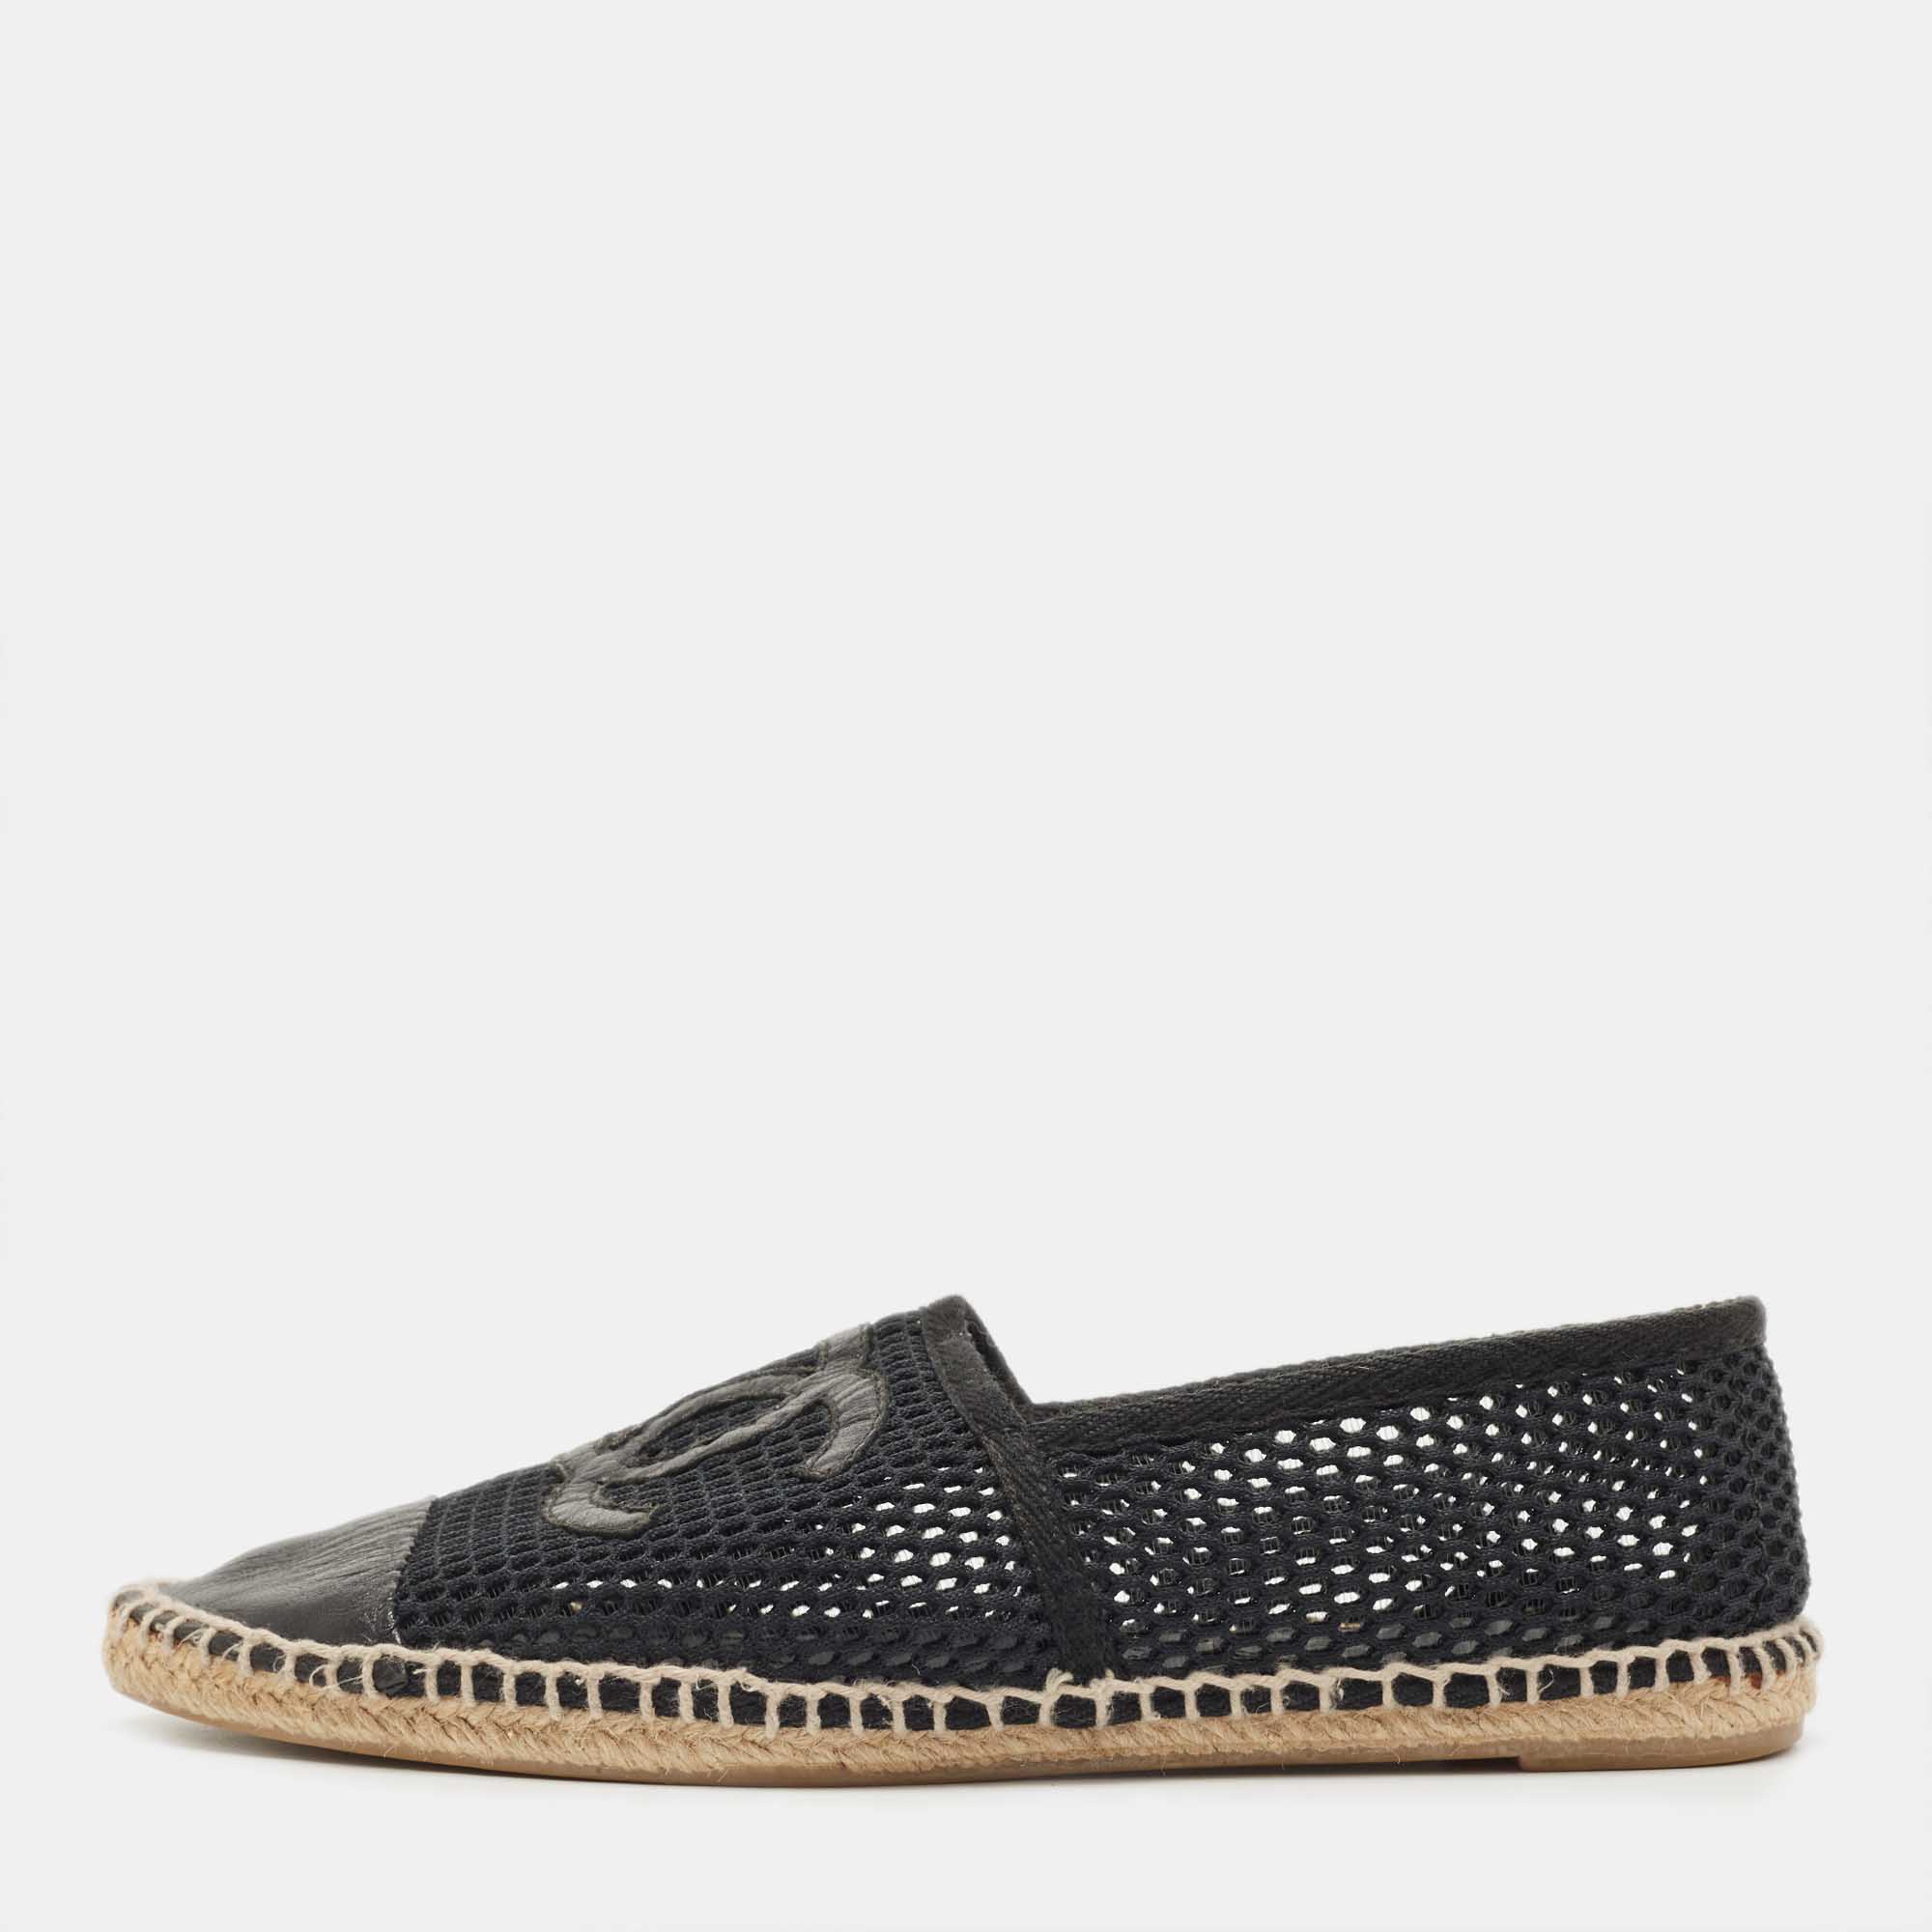 Chanel Women's CC Espadrilles Printed Mesh with Leather Black 141768387